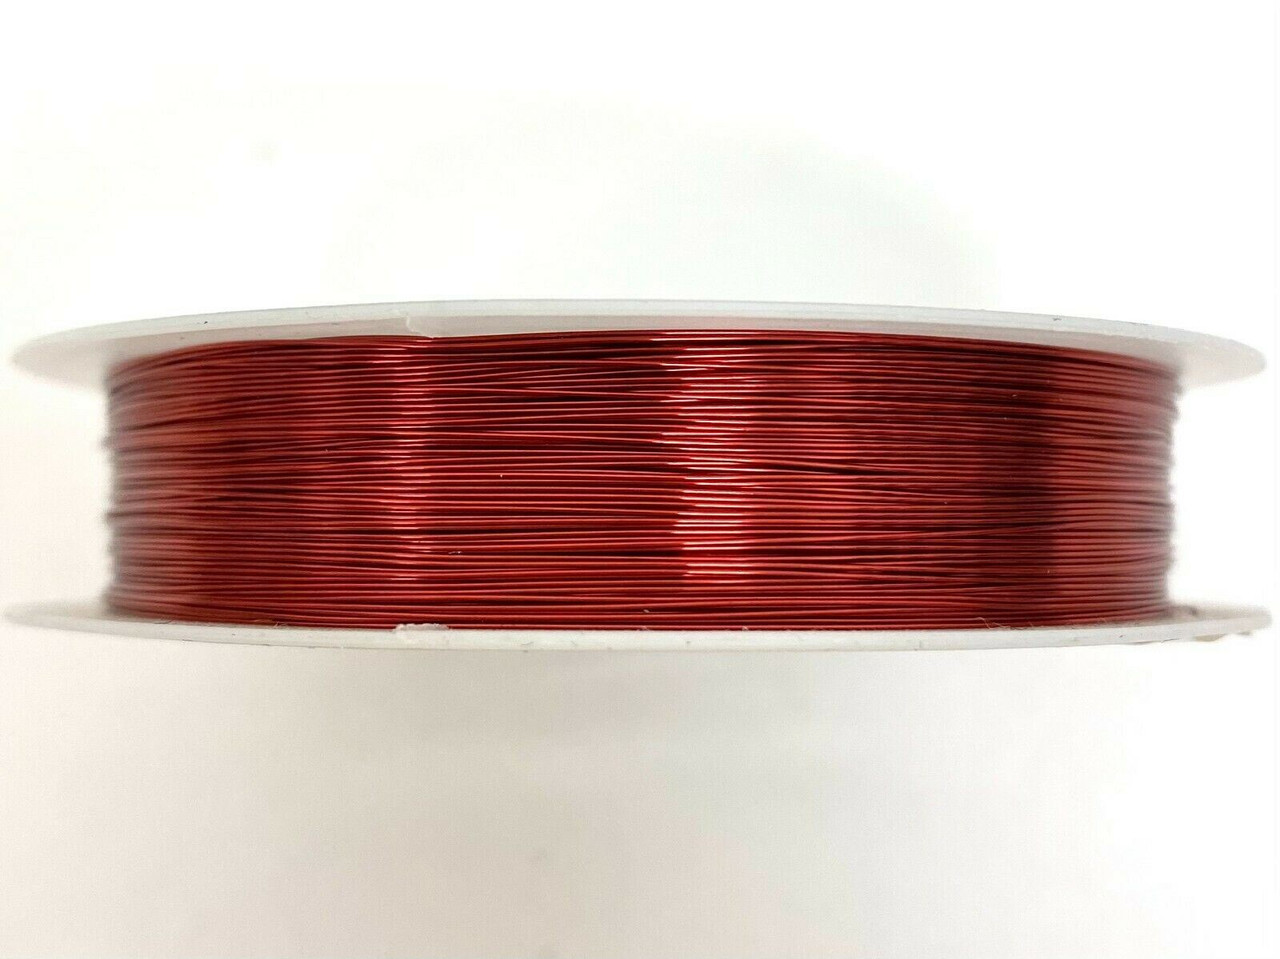 Roll of Copper Wire, 0.4mm thickness, DARK RED colour, approx 10m length